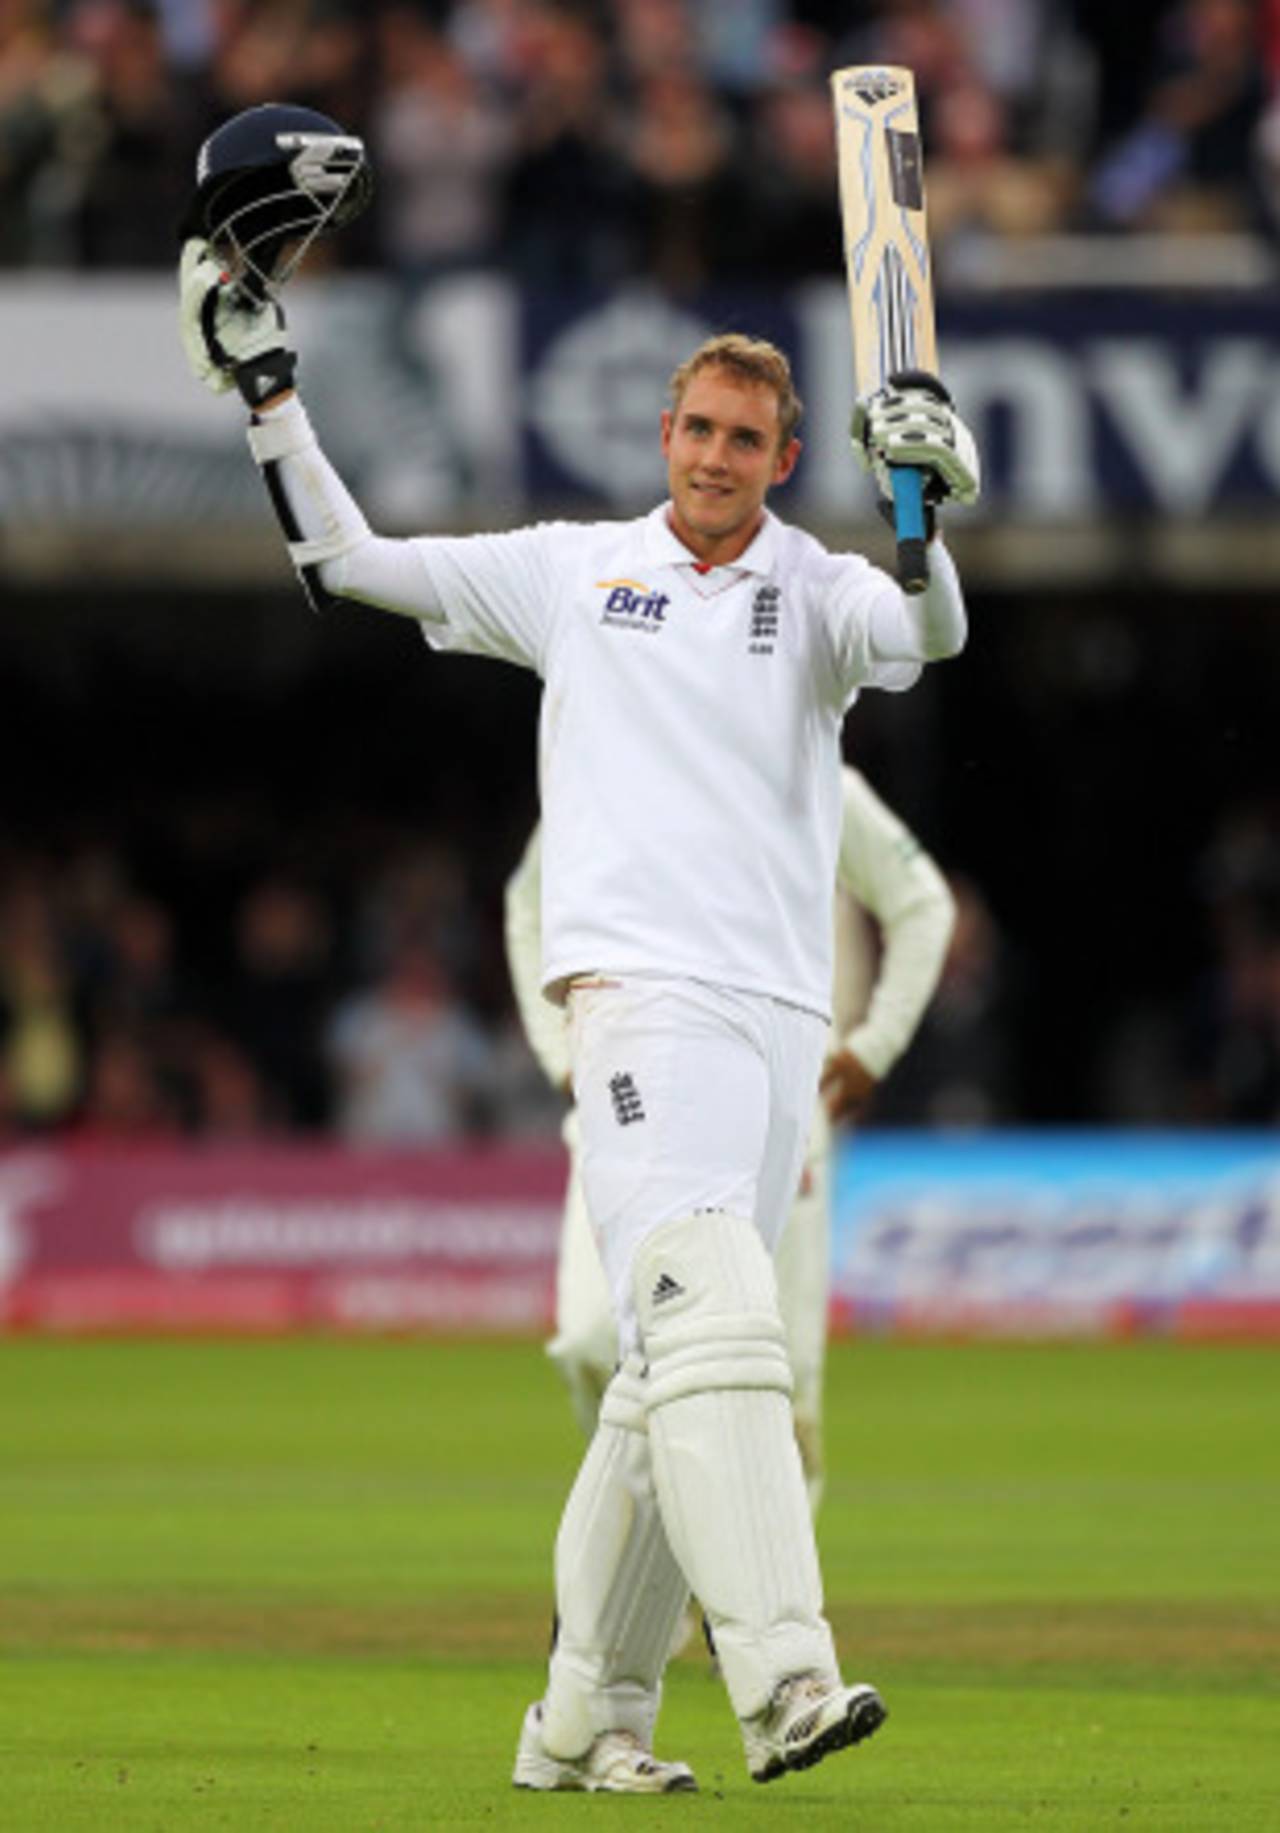 Stuart Broad acknowledges the standing ovation from the Lord's crowd after reaching a sensational hundred, England v Pakistan, 4th npower Test, Lord's, August 27 2010